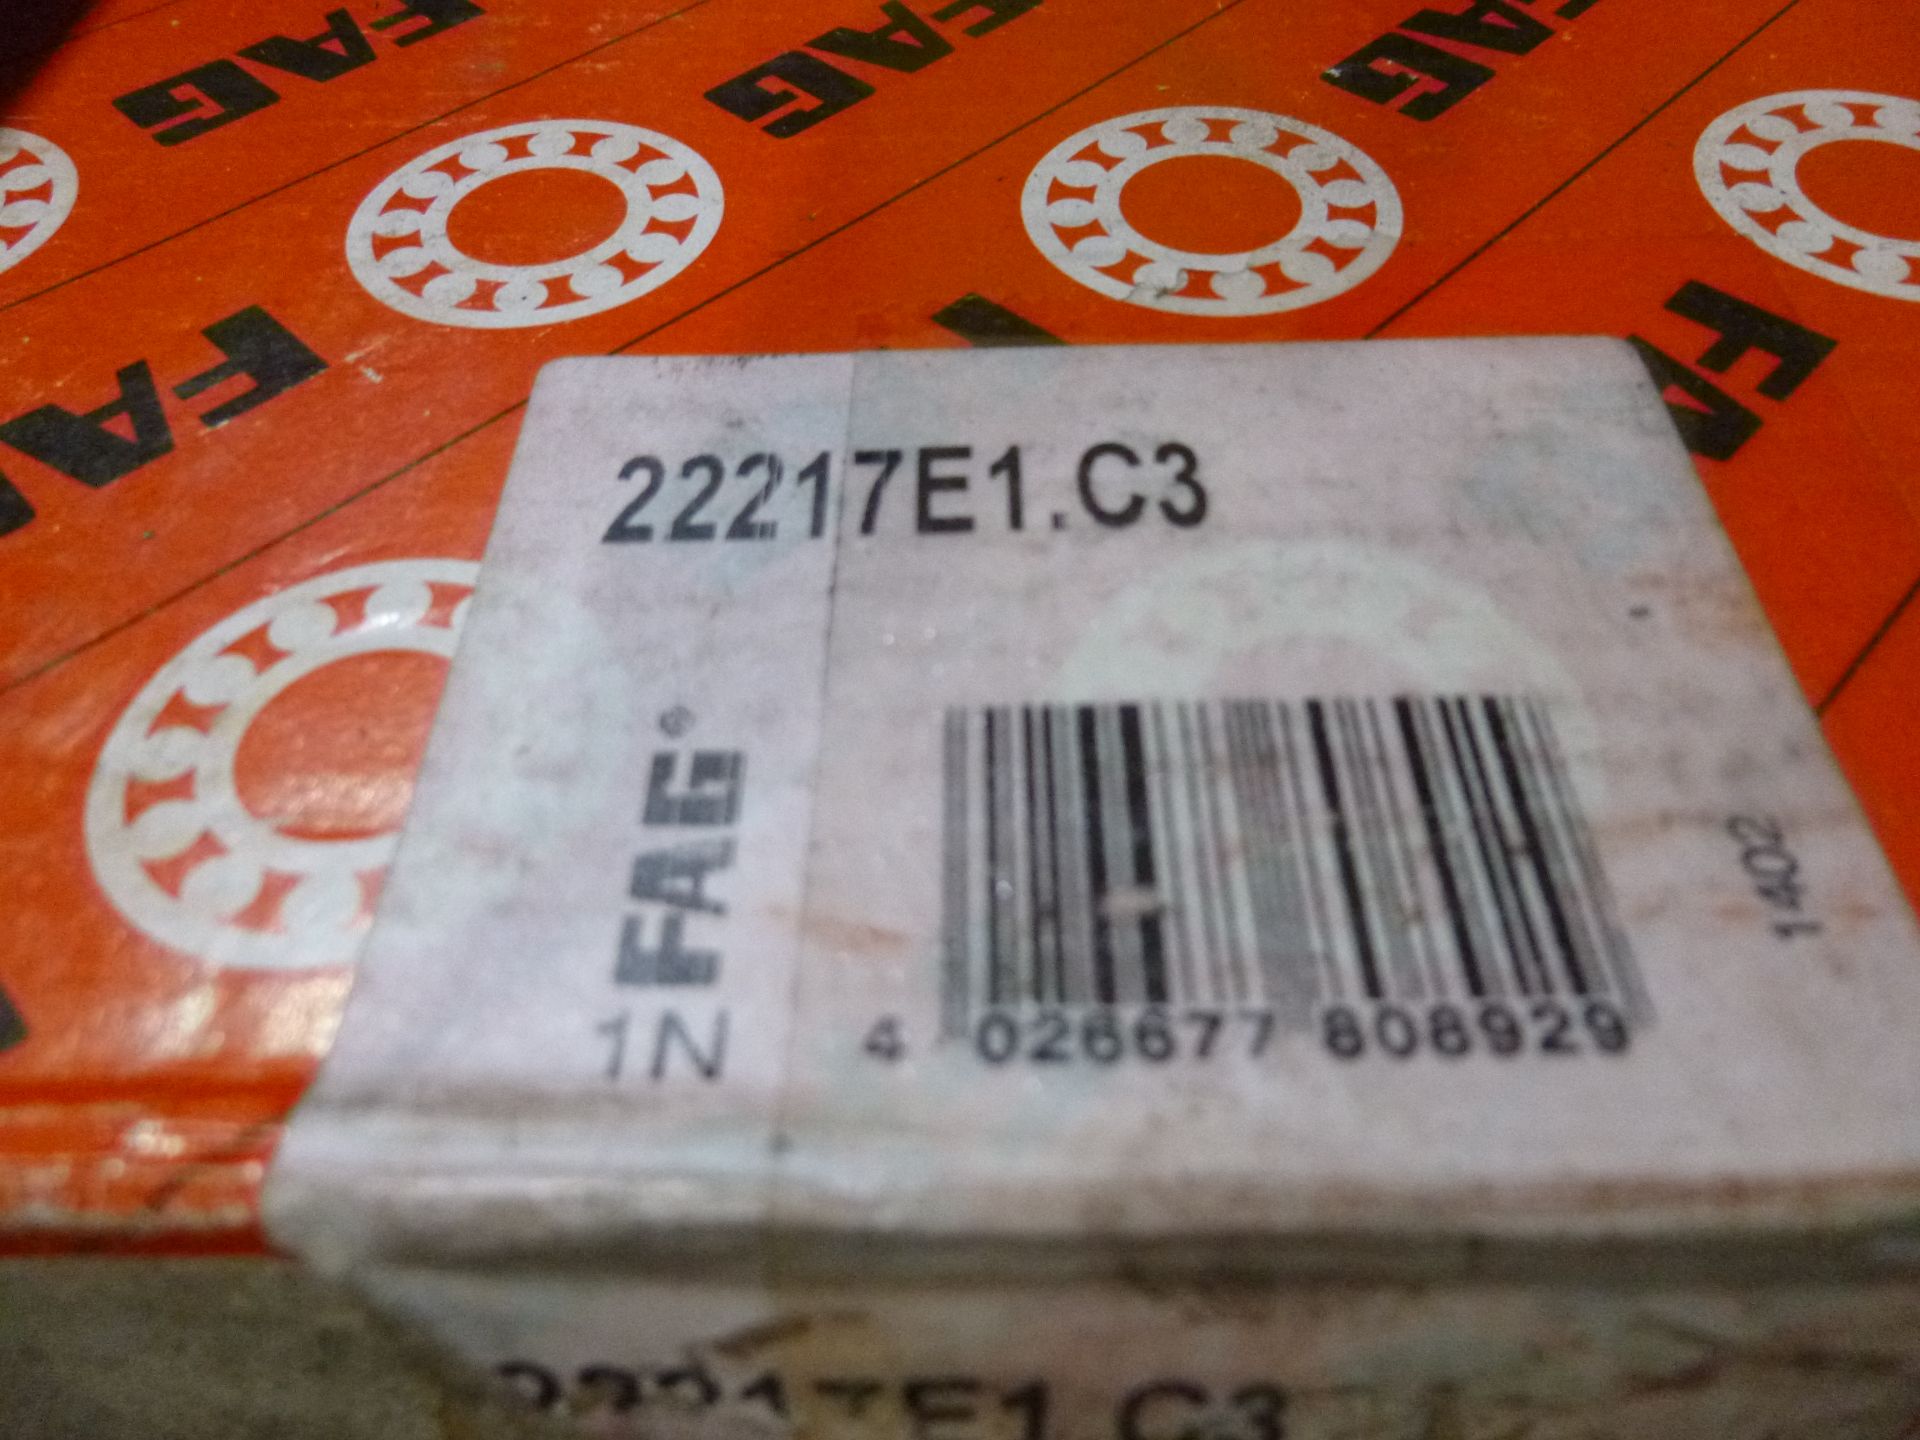 Fag bearing 22217E1.C3, as always with Brolyn LLC auctions, all lots can be picked up from auction - Image 2 of 2